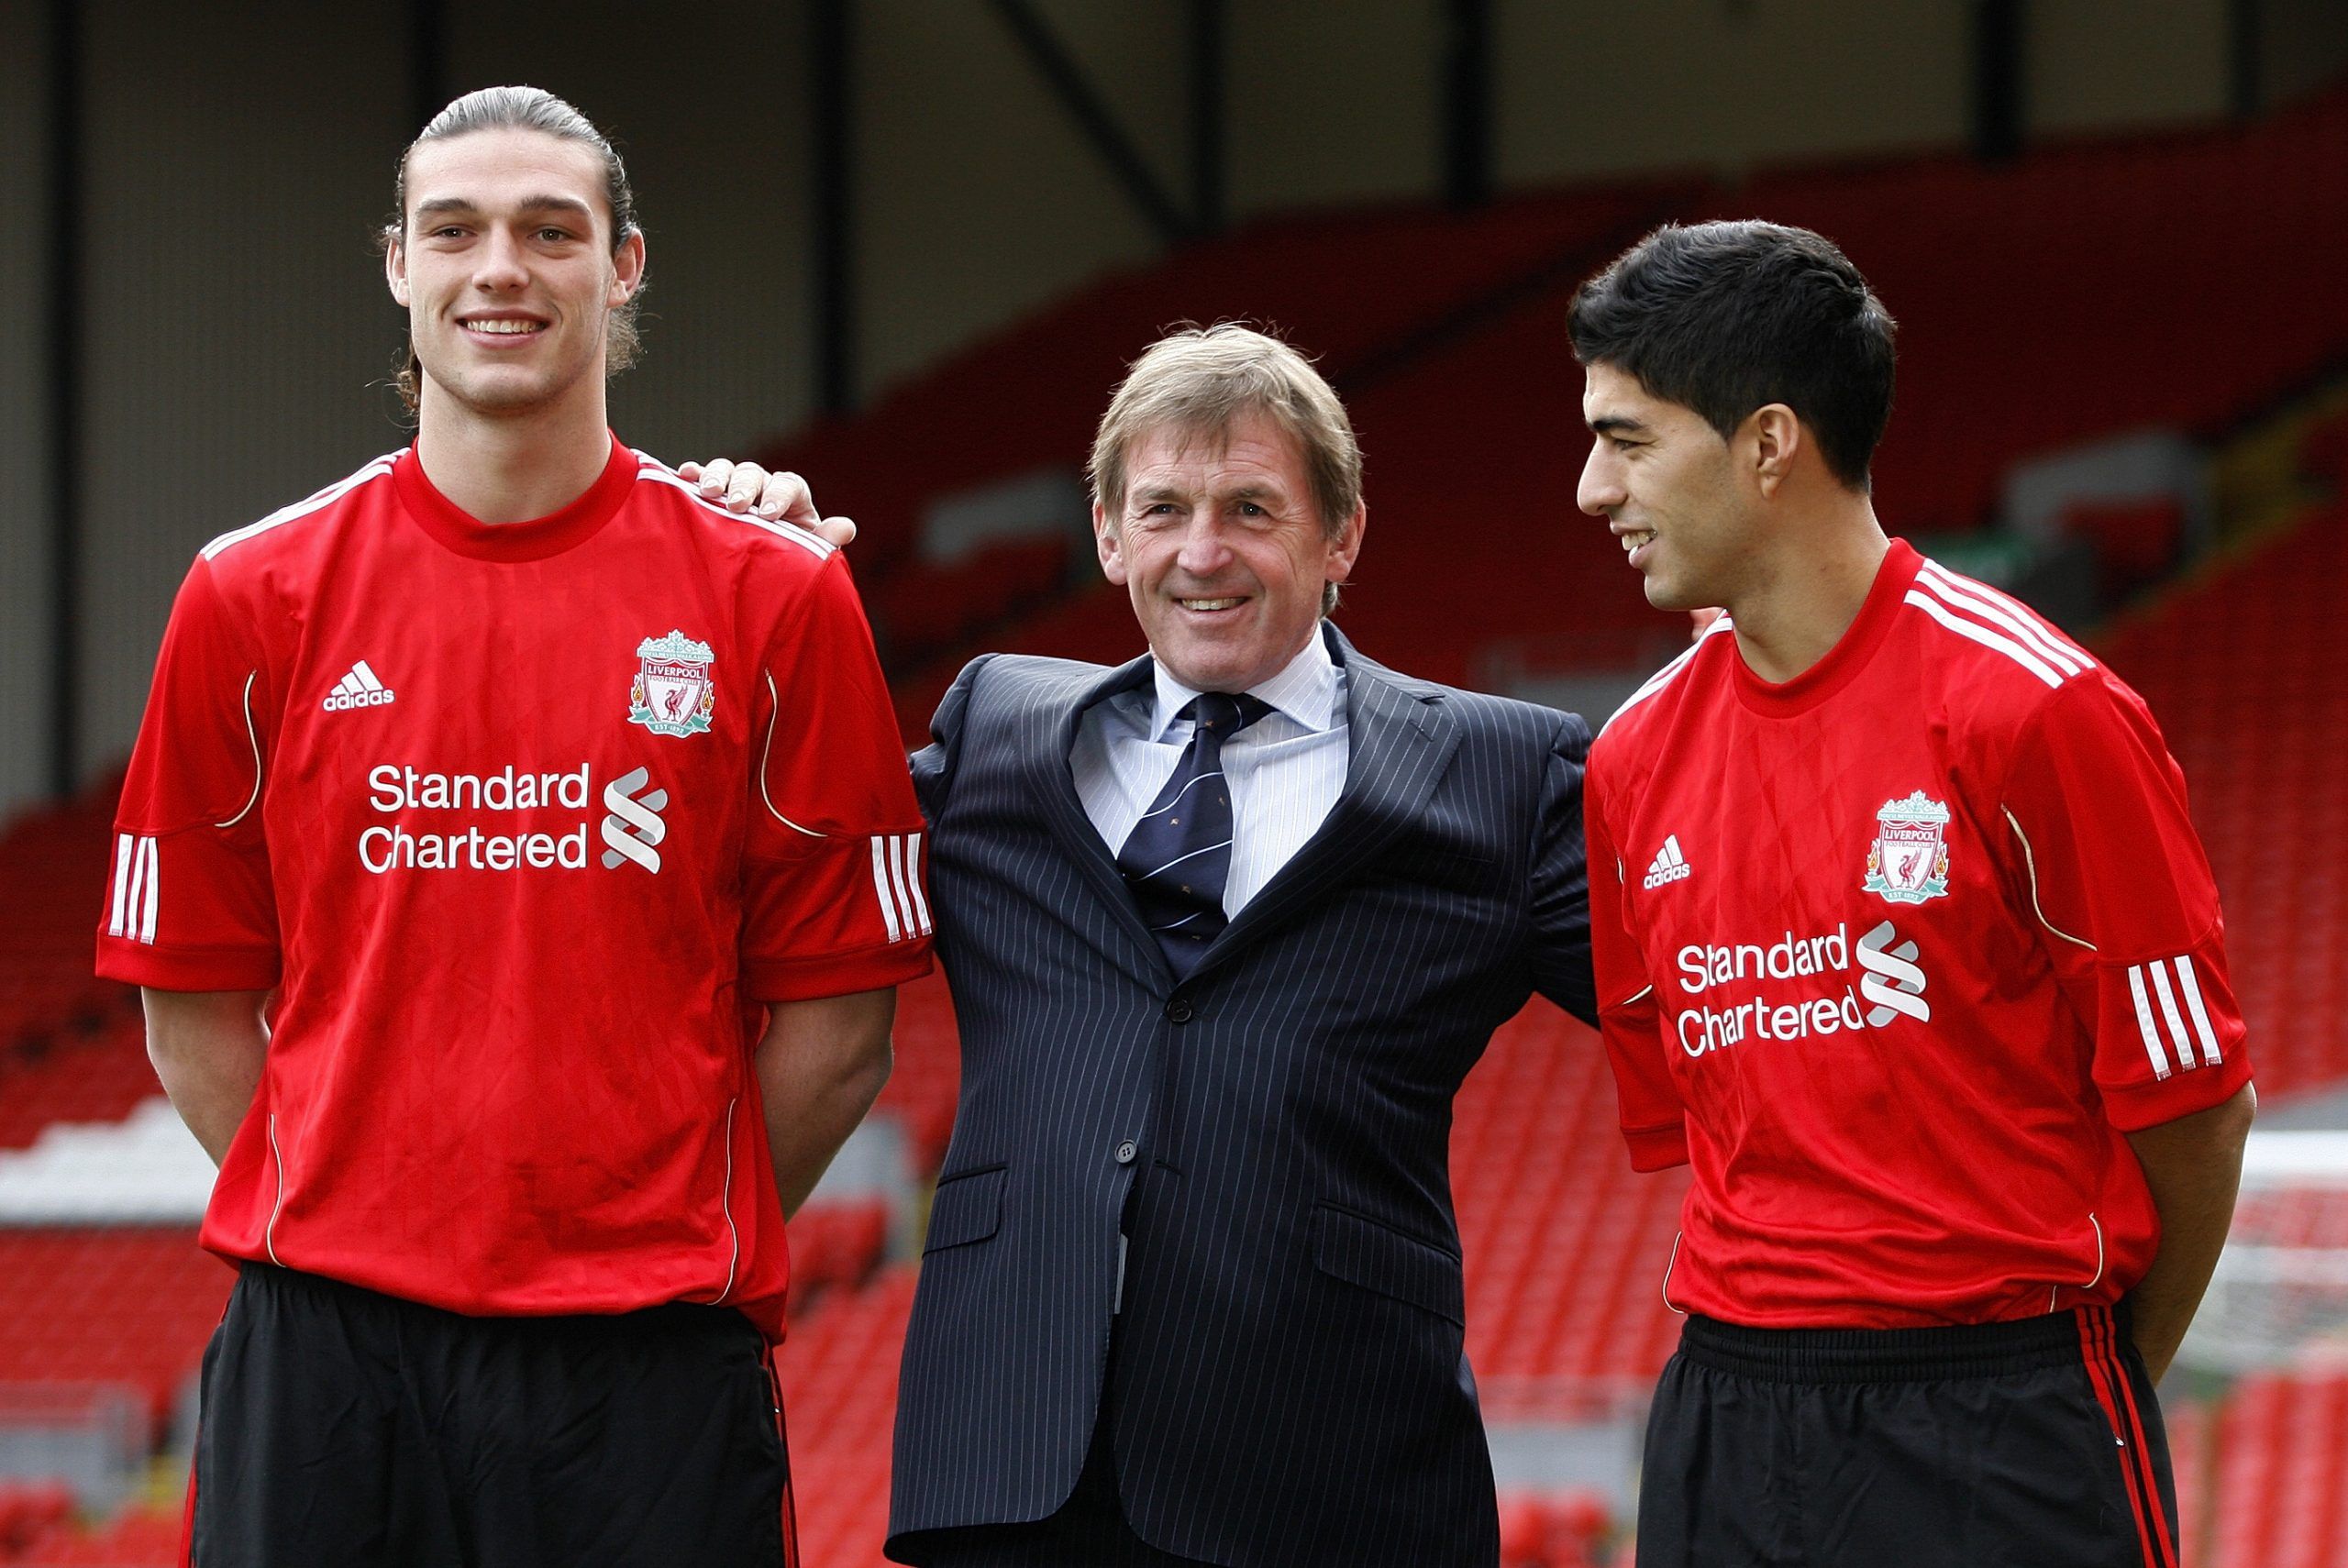 Football - Liverpool - Luis Suarez &amp; Andy Carroll Press Conference  - Anfield -  10/11 - 3/2/11 
Liverpool manager Kenny Dalglish with new signings Andy Carroll (L) and Luis Suarez (R) after the press conference 
Mandatory Credit: Action Images / Paul Thomas 
Livepic